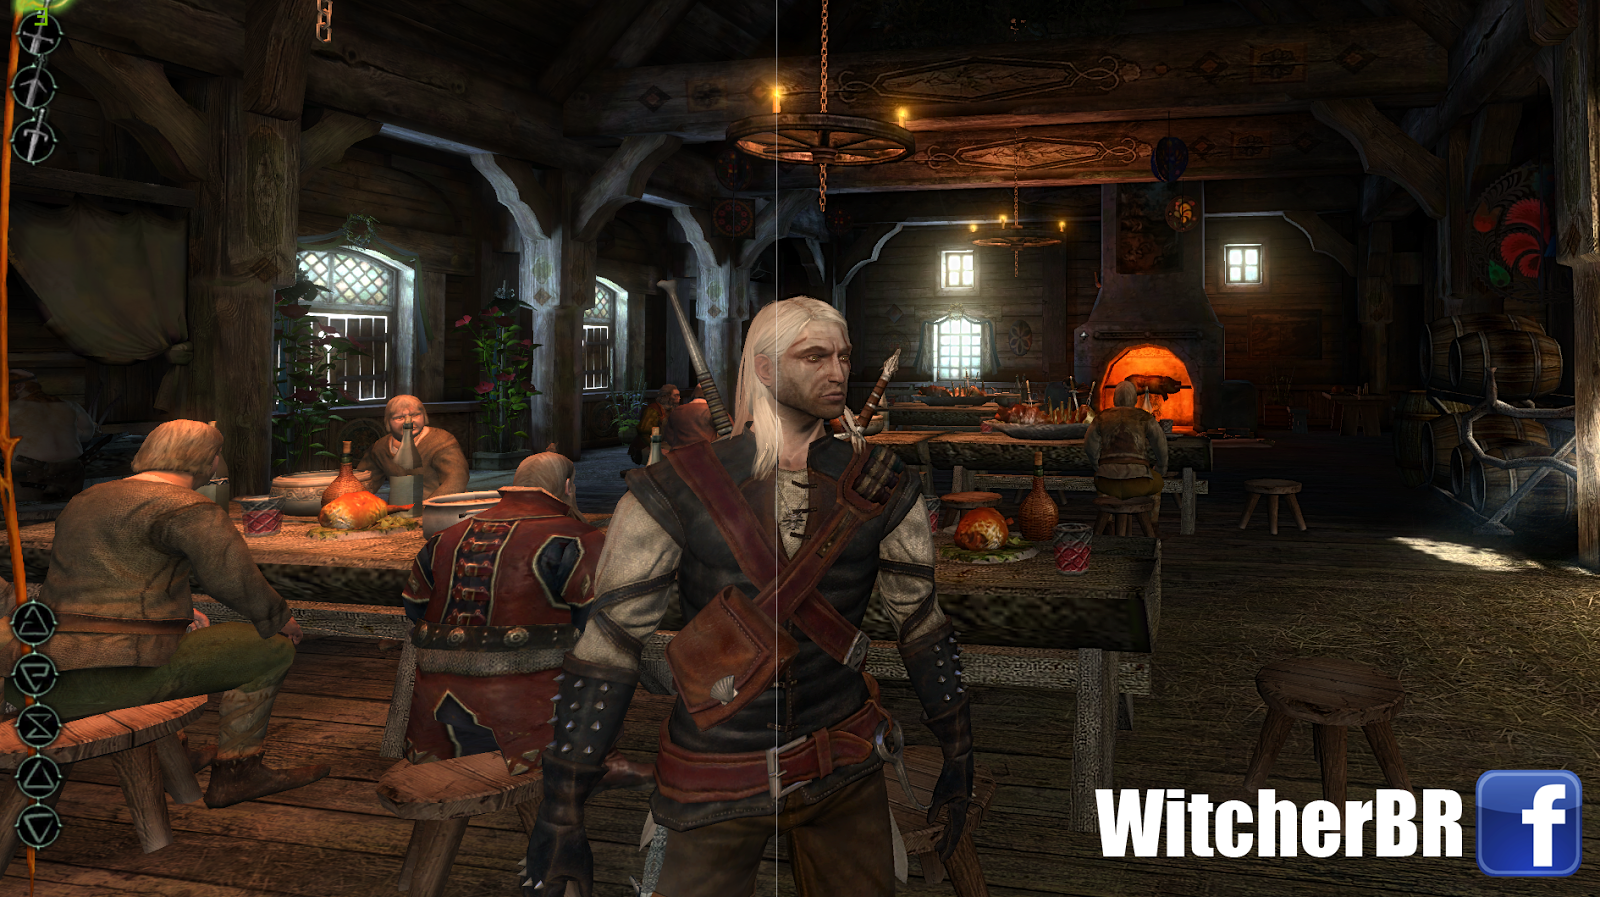 The Witcher 2: Assassins of Kings Enhanced Edition Requisitos